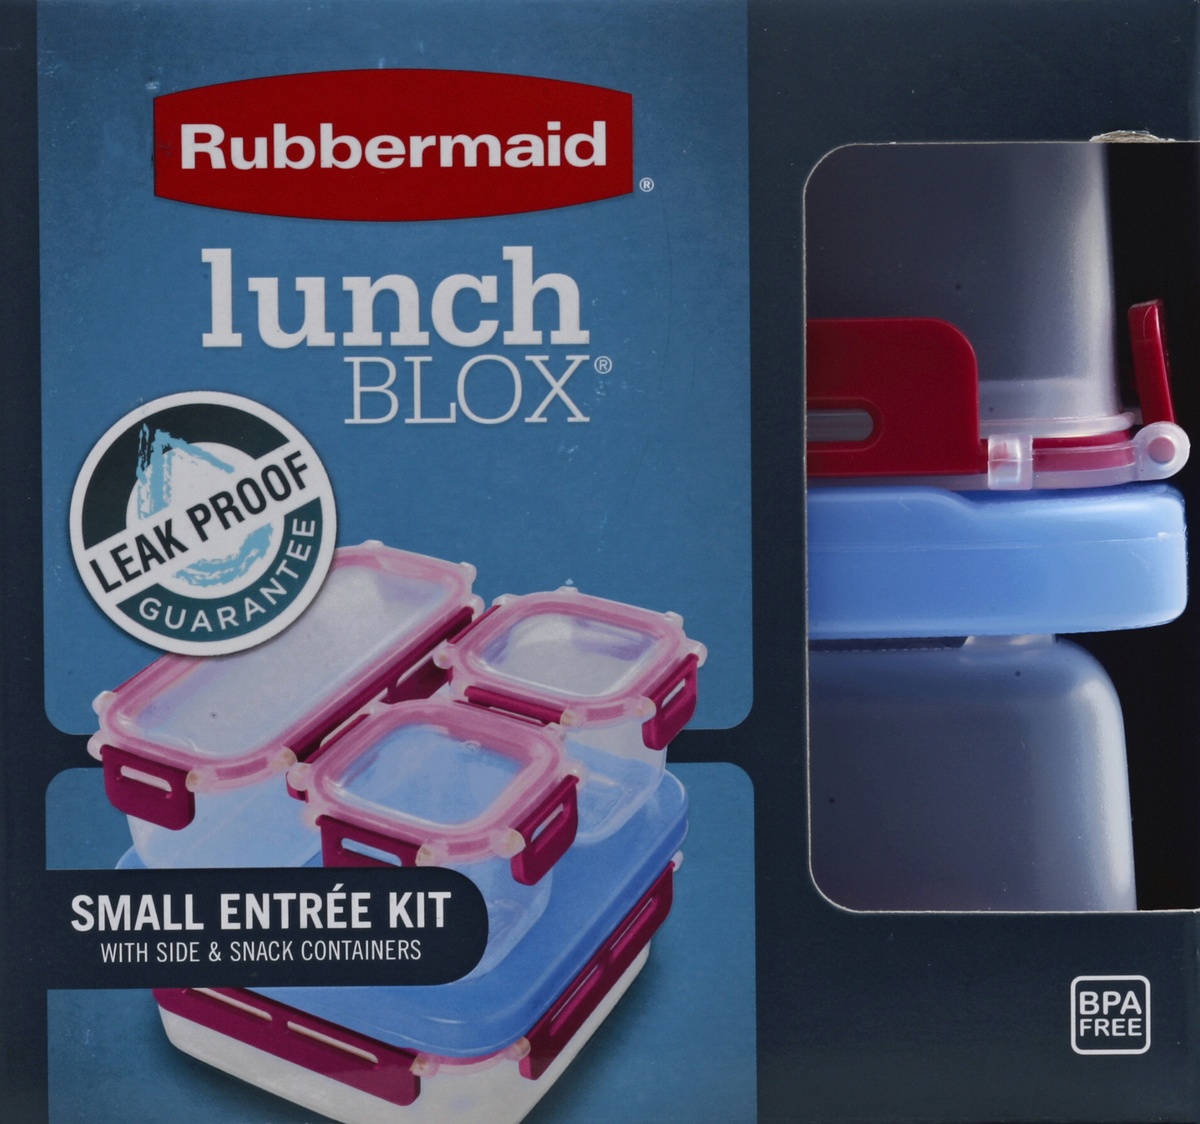 Rubbermaid LunchBlox Leak-Proof Entree Lunch Container Kit Large Blue